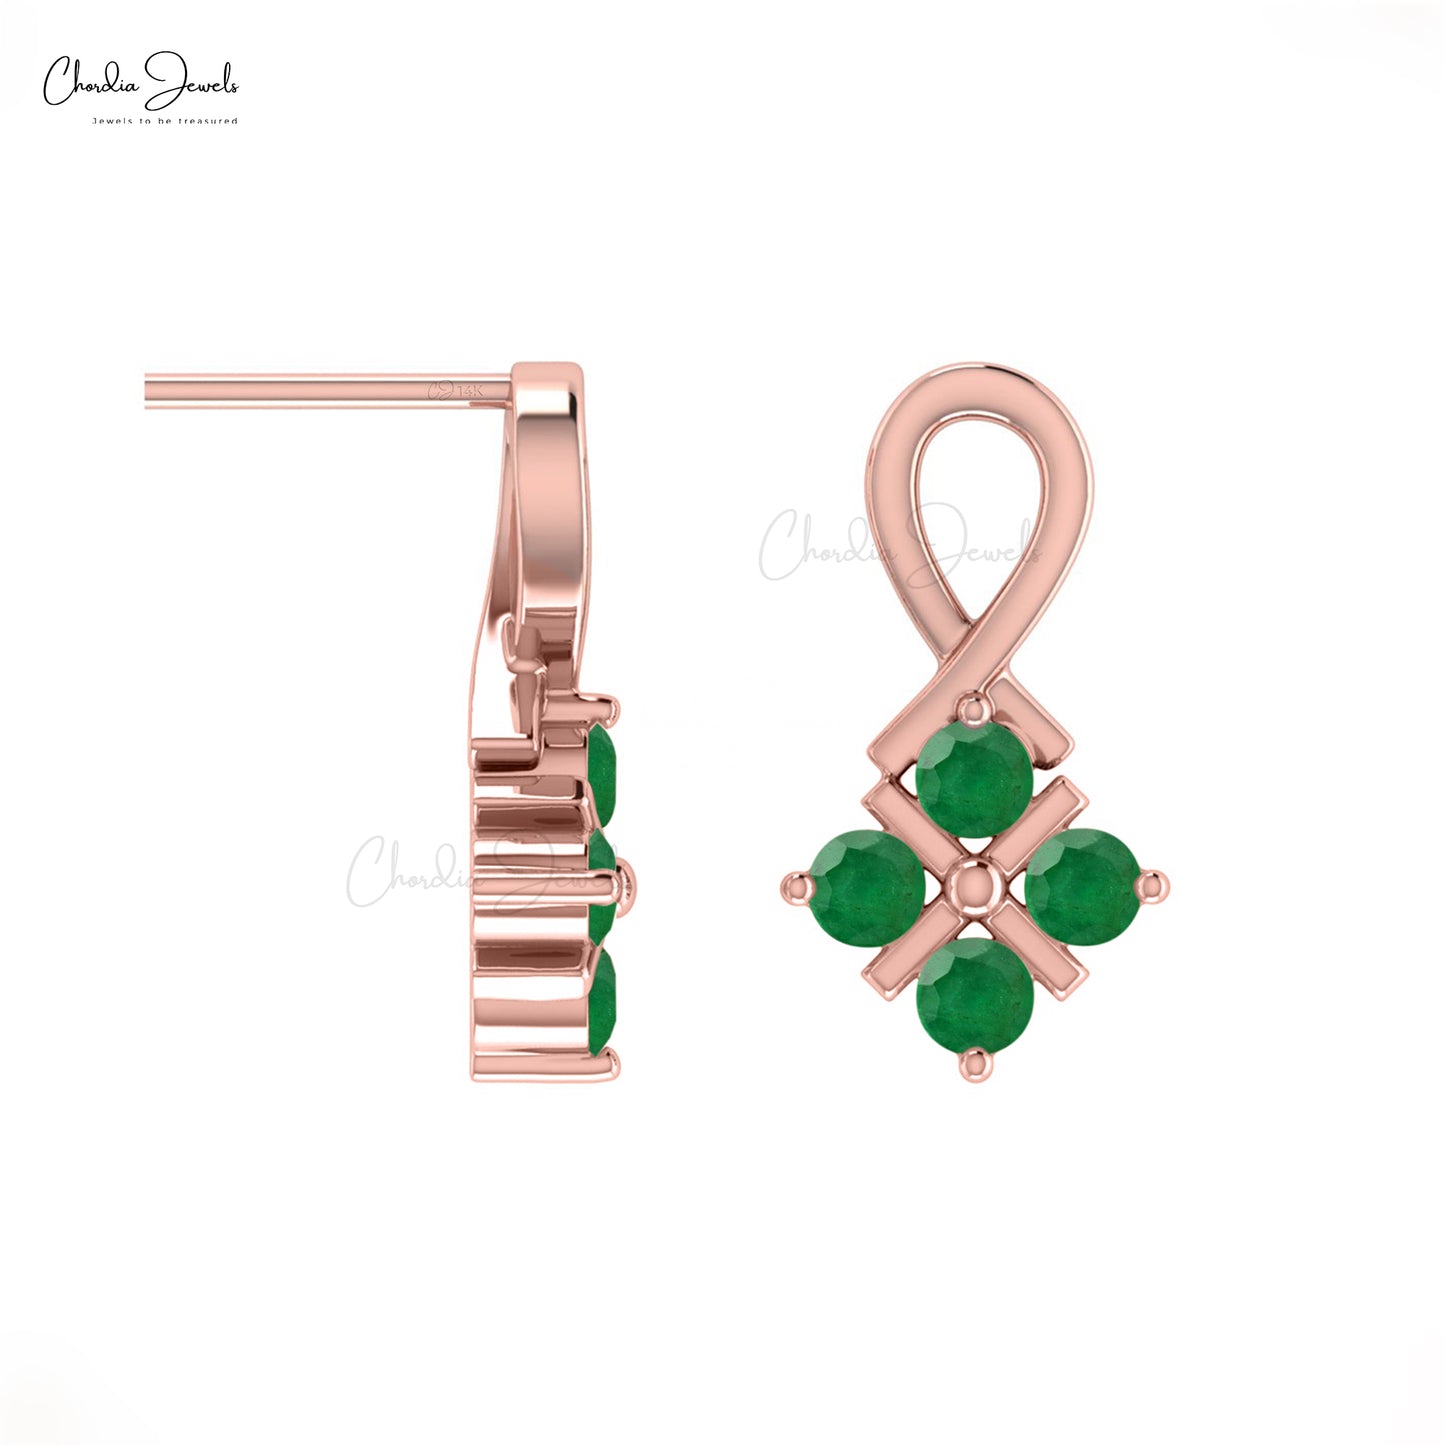 Transform your outfit from ordinary to extraordinary with these emerald women's earrings.